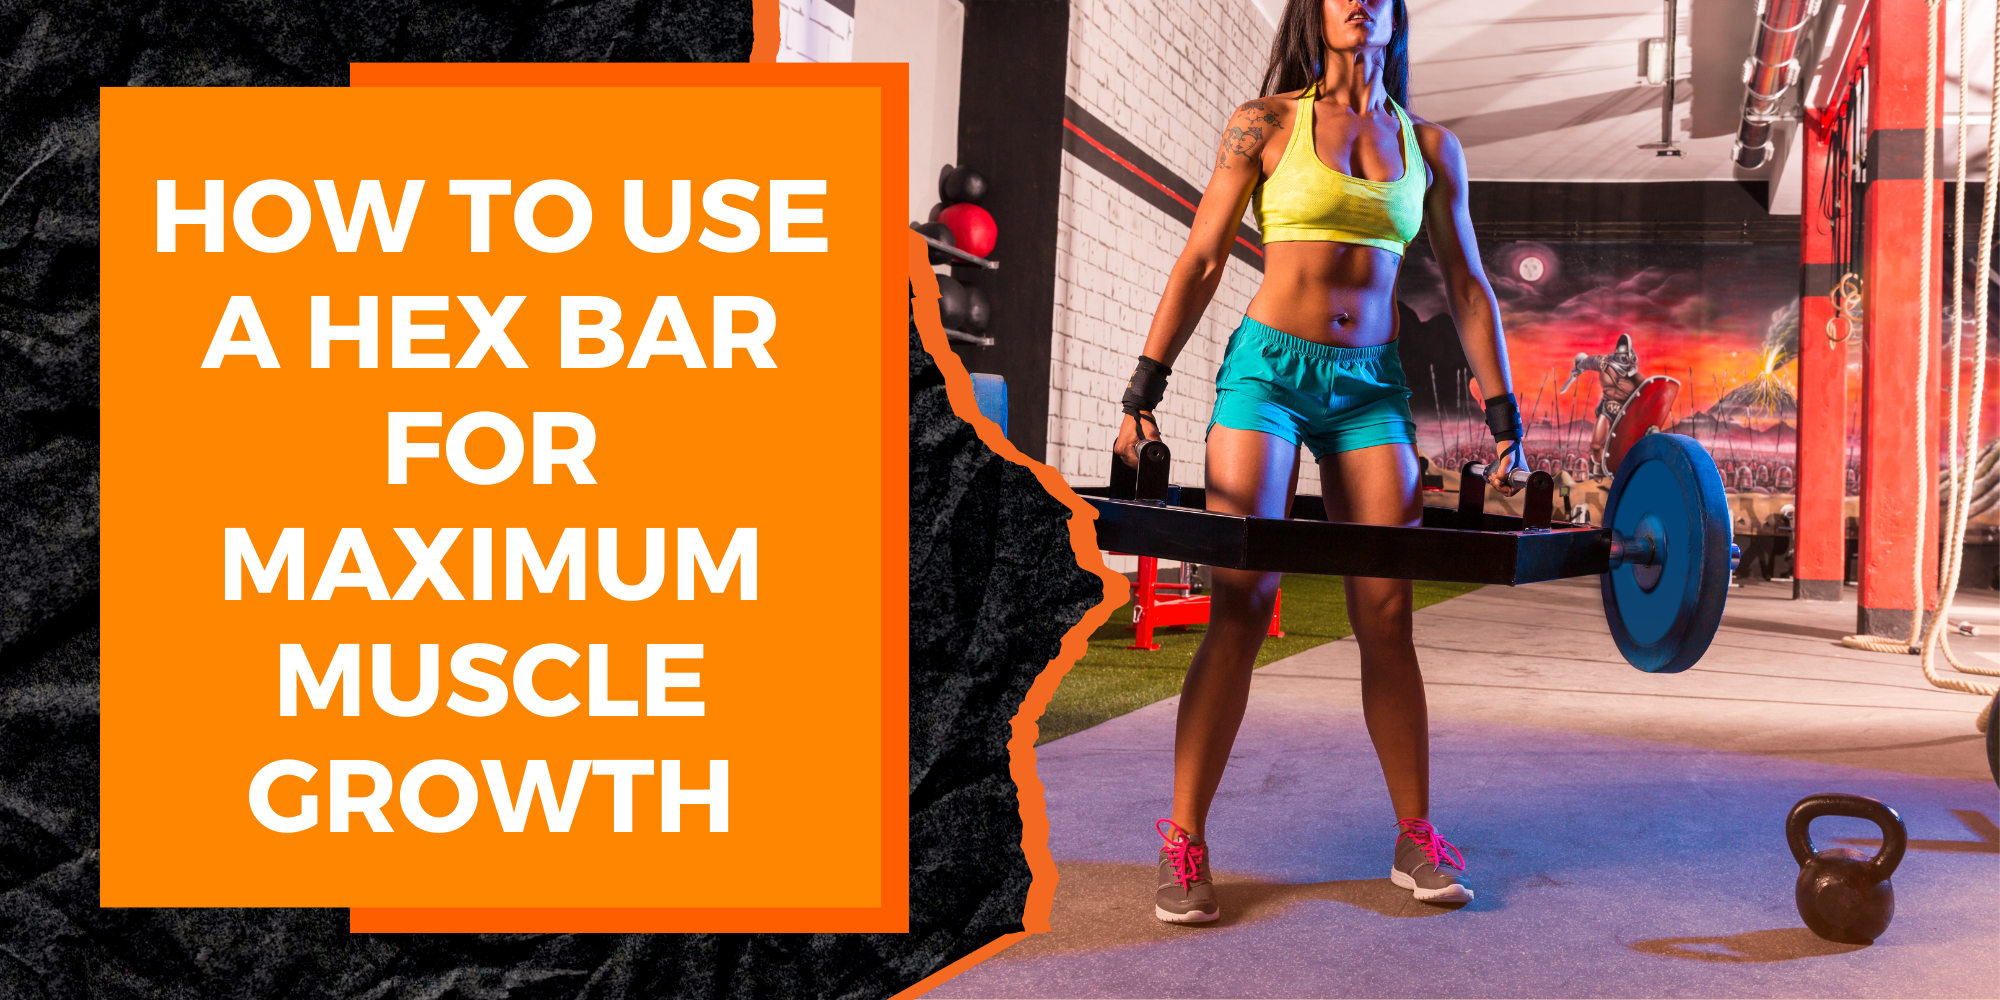 How to Use a Hex Bar For Maximum Muscle Growth